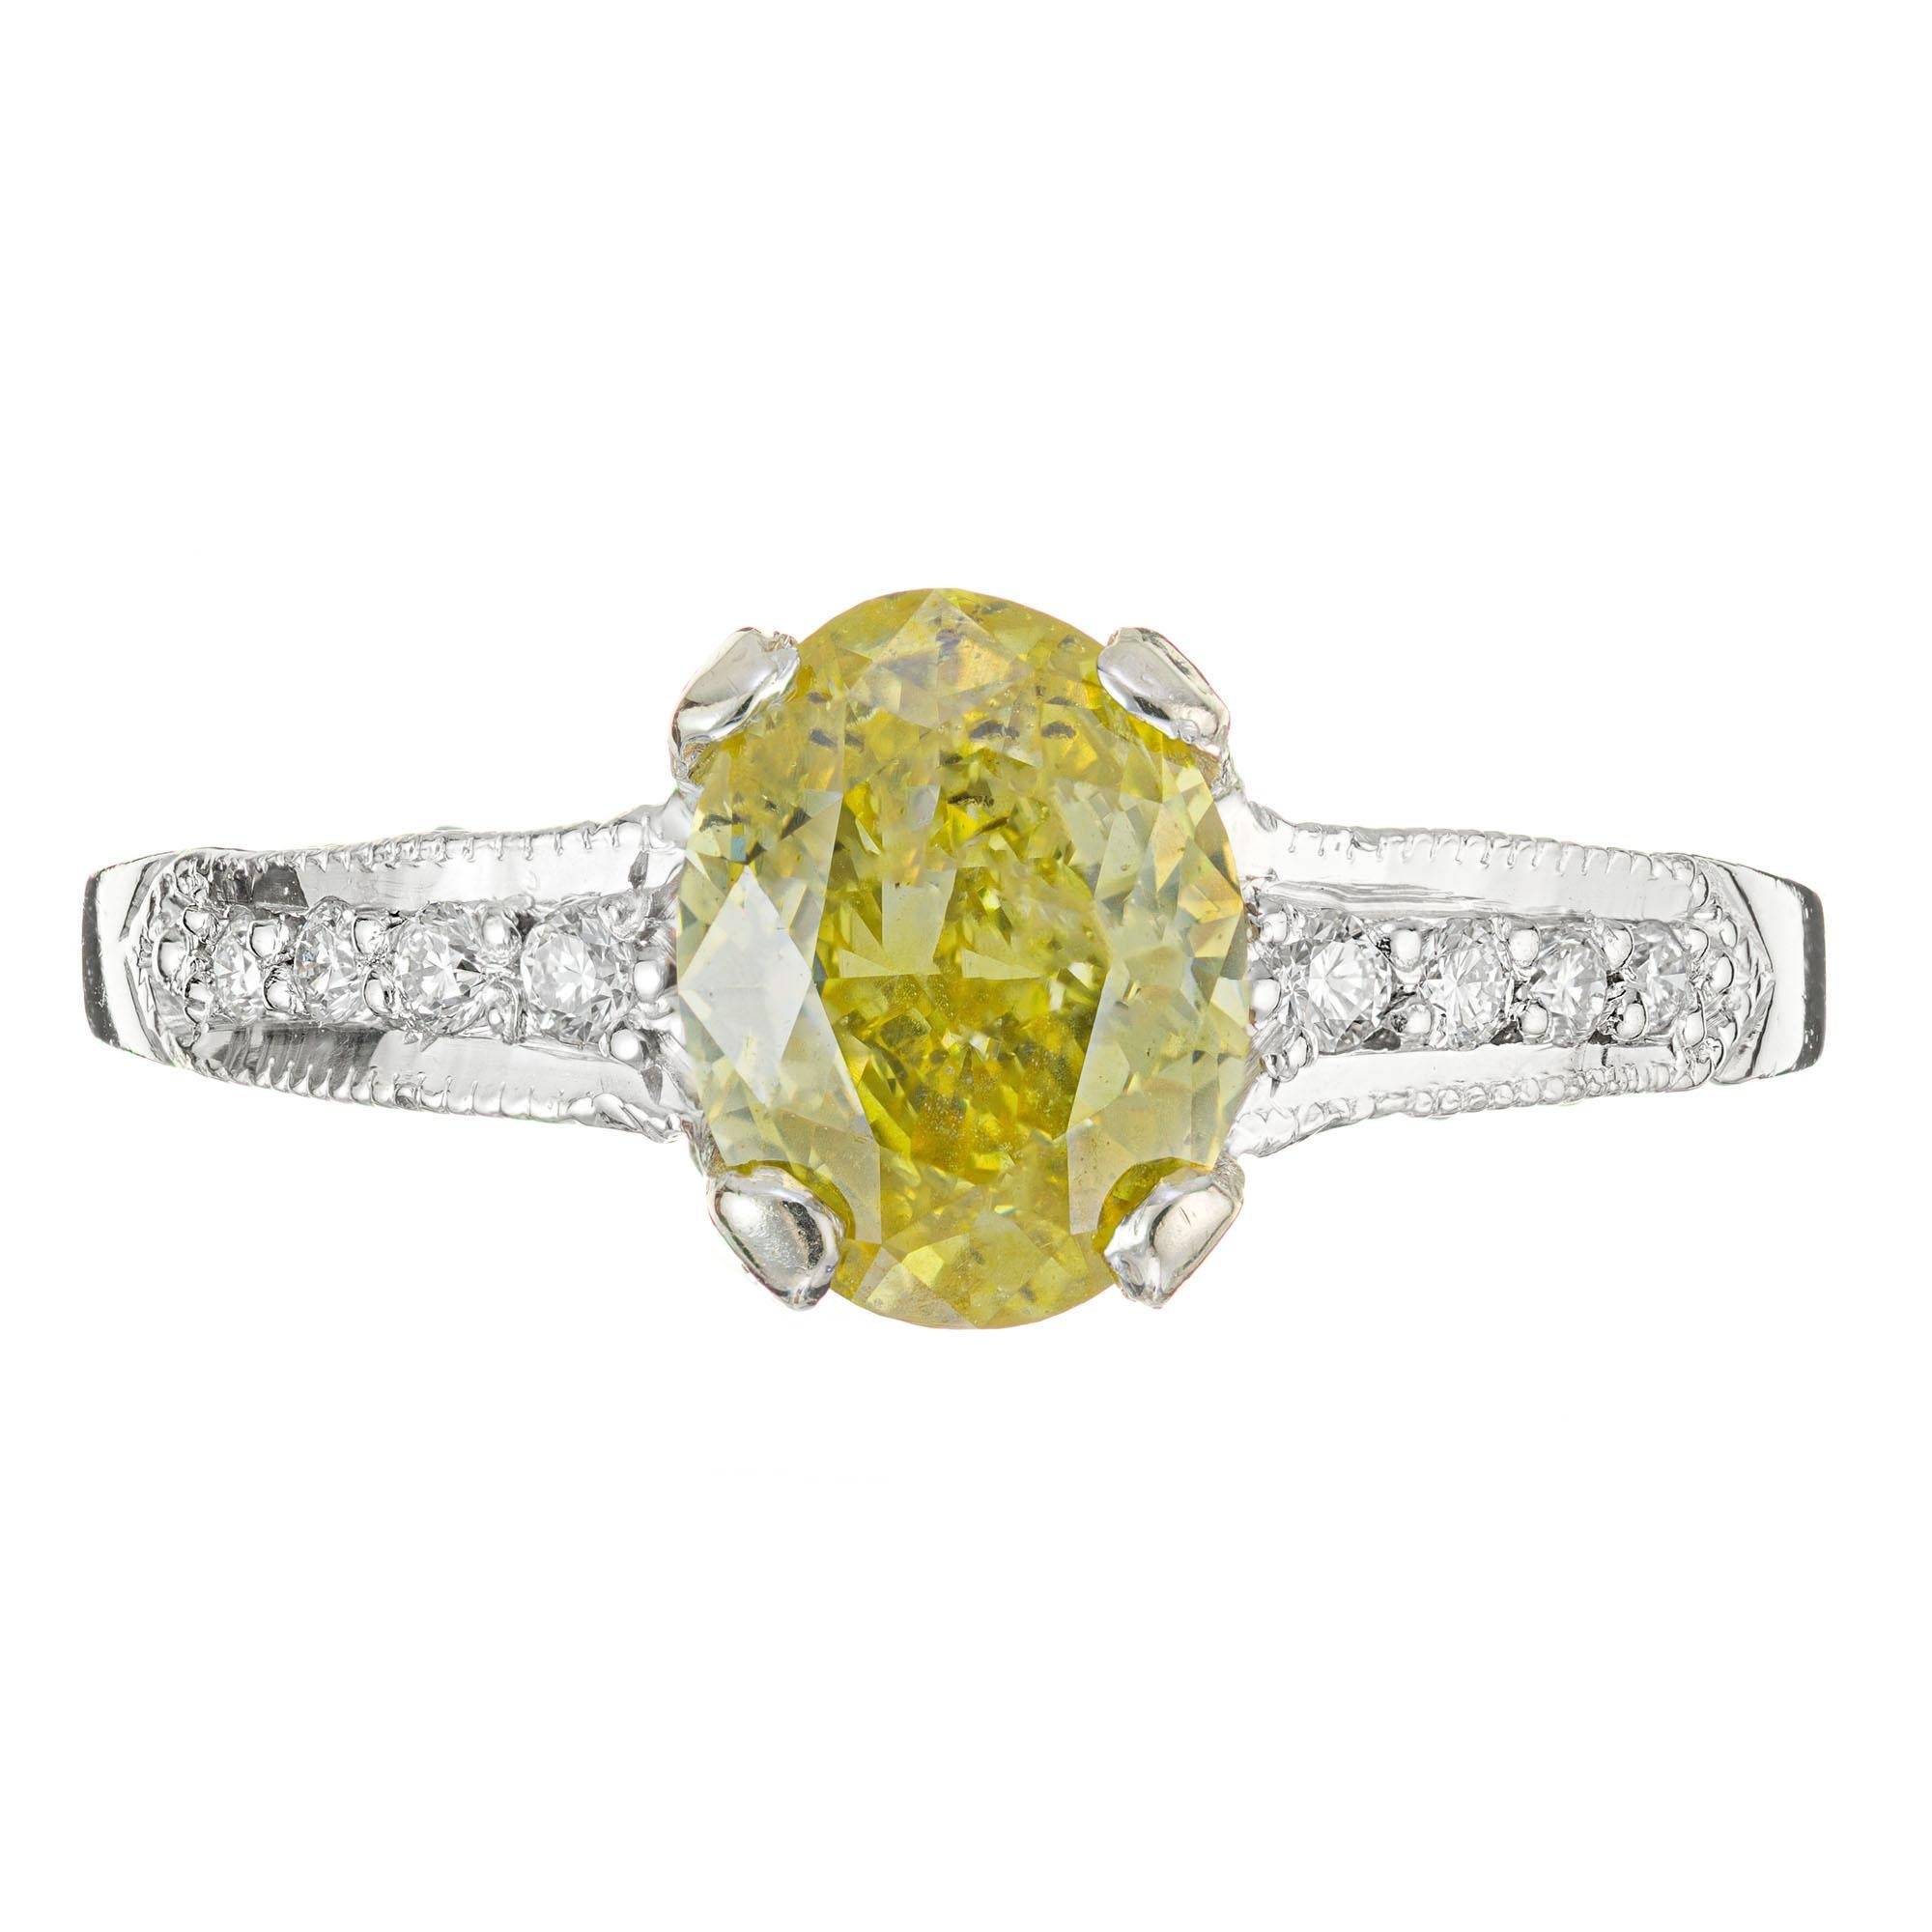 1960's Fancy oval yellow diamond engagement ring. 1.07ct GIA certified fancy yellow oval diamond in a platinum setting with 30 round full cut micro pave accent diamonds. 

1 Very rare 1.07ct oval deep yellow diamond GIA certificate #5111919234, I